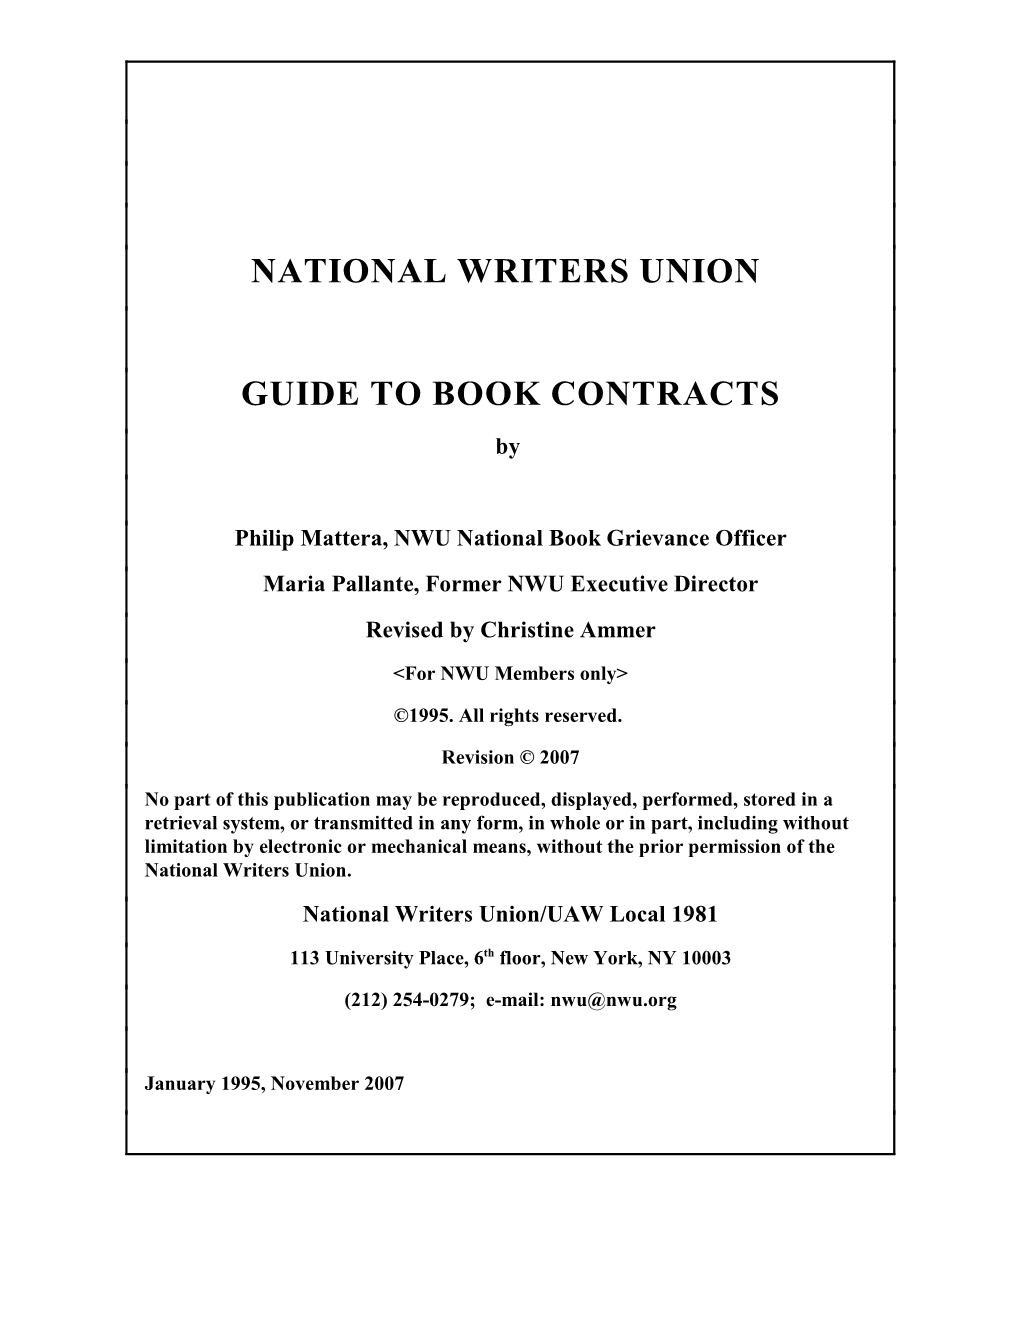 Guide to Book Contracts